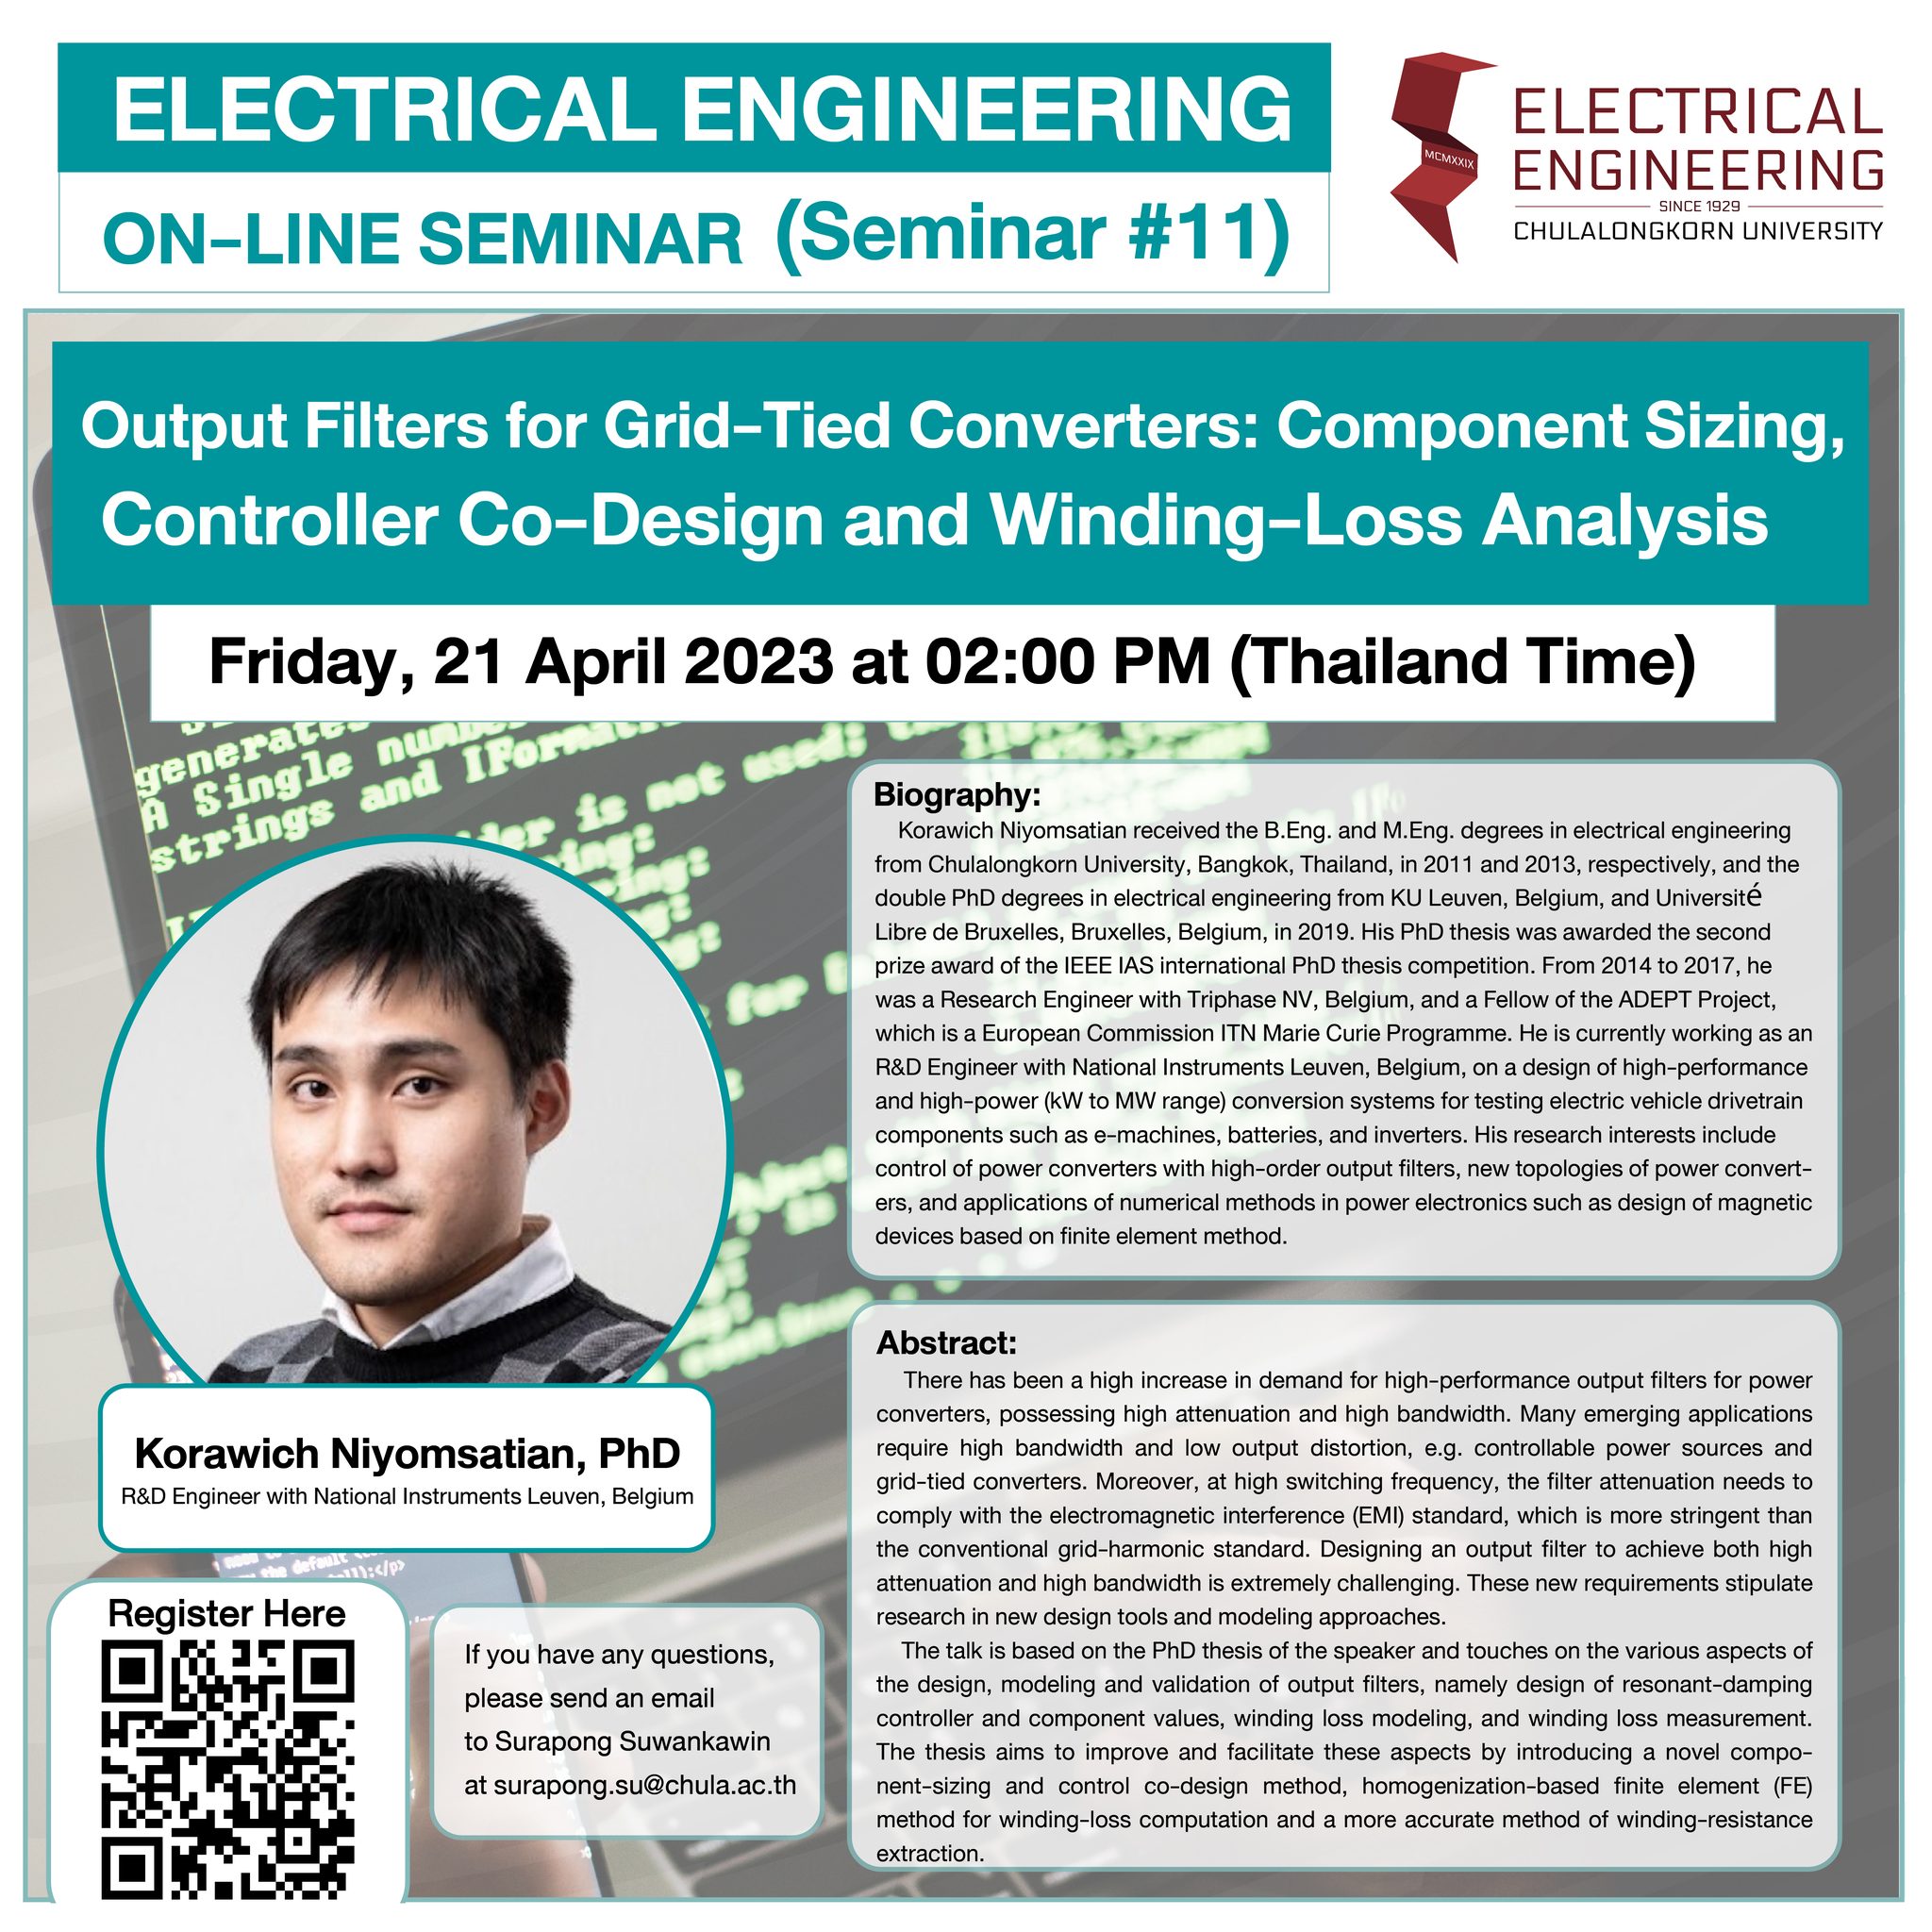 ELECTRICAL ENGINEERING ON-LINE SEMINAR (Seminar #11) "Output Filters for Grid-Tied Converters: Component Sizing, Controller Co-Design and Winding-Loss Analysis"